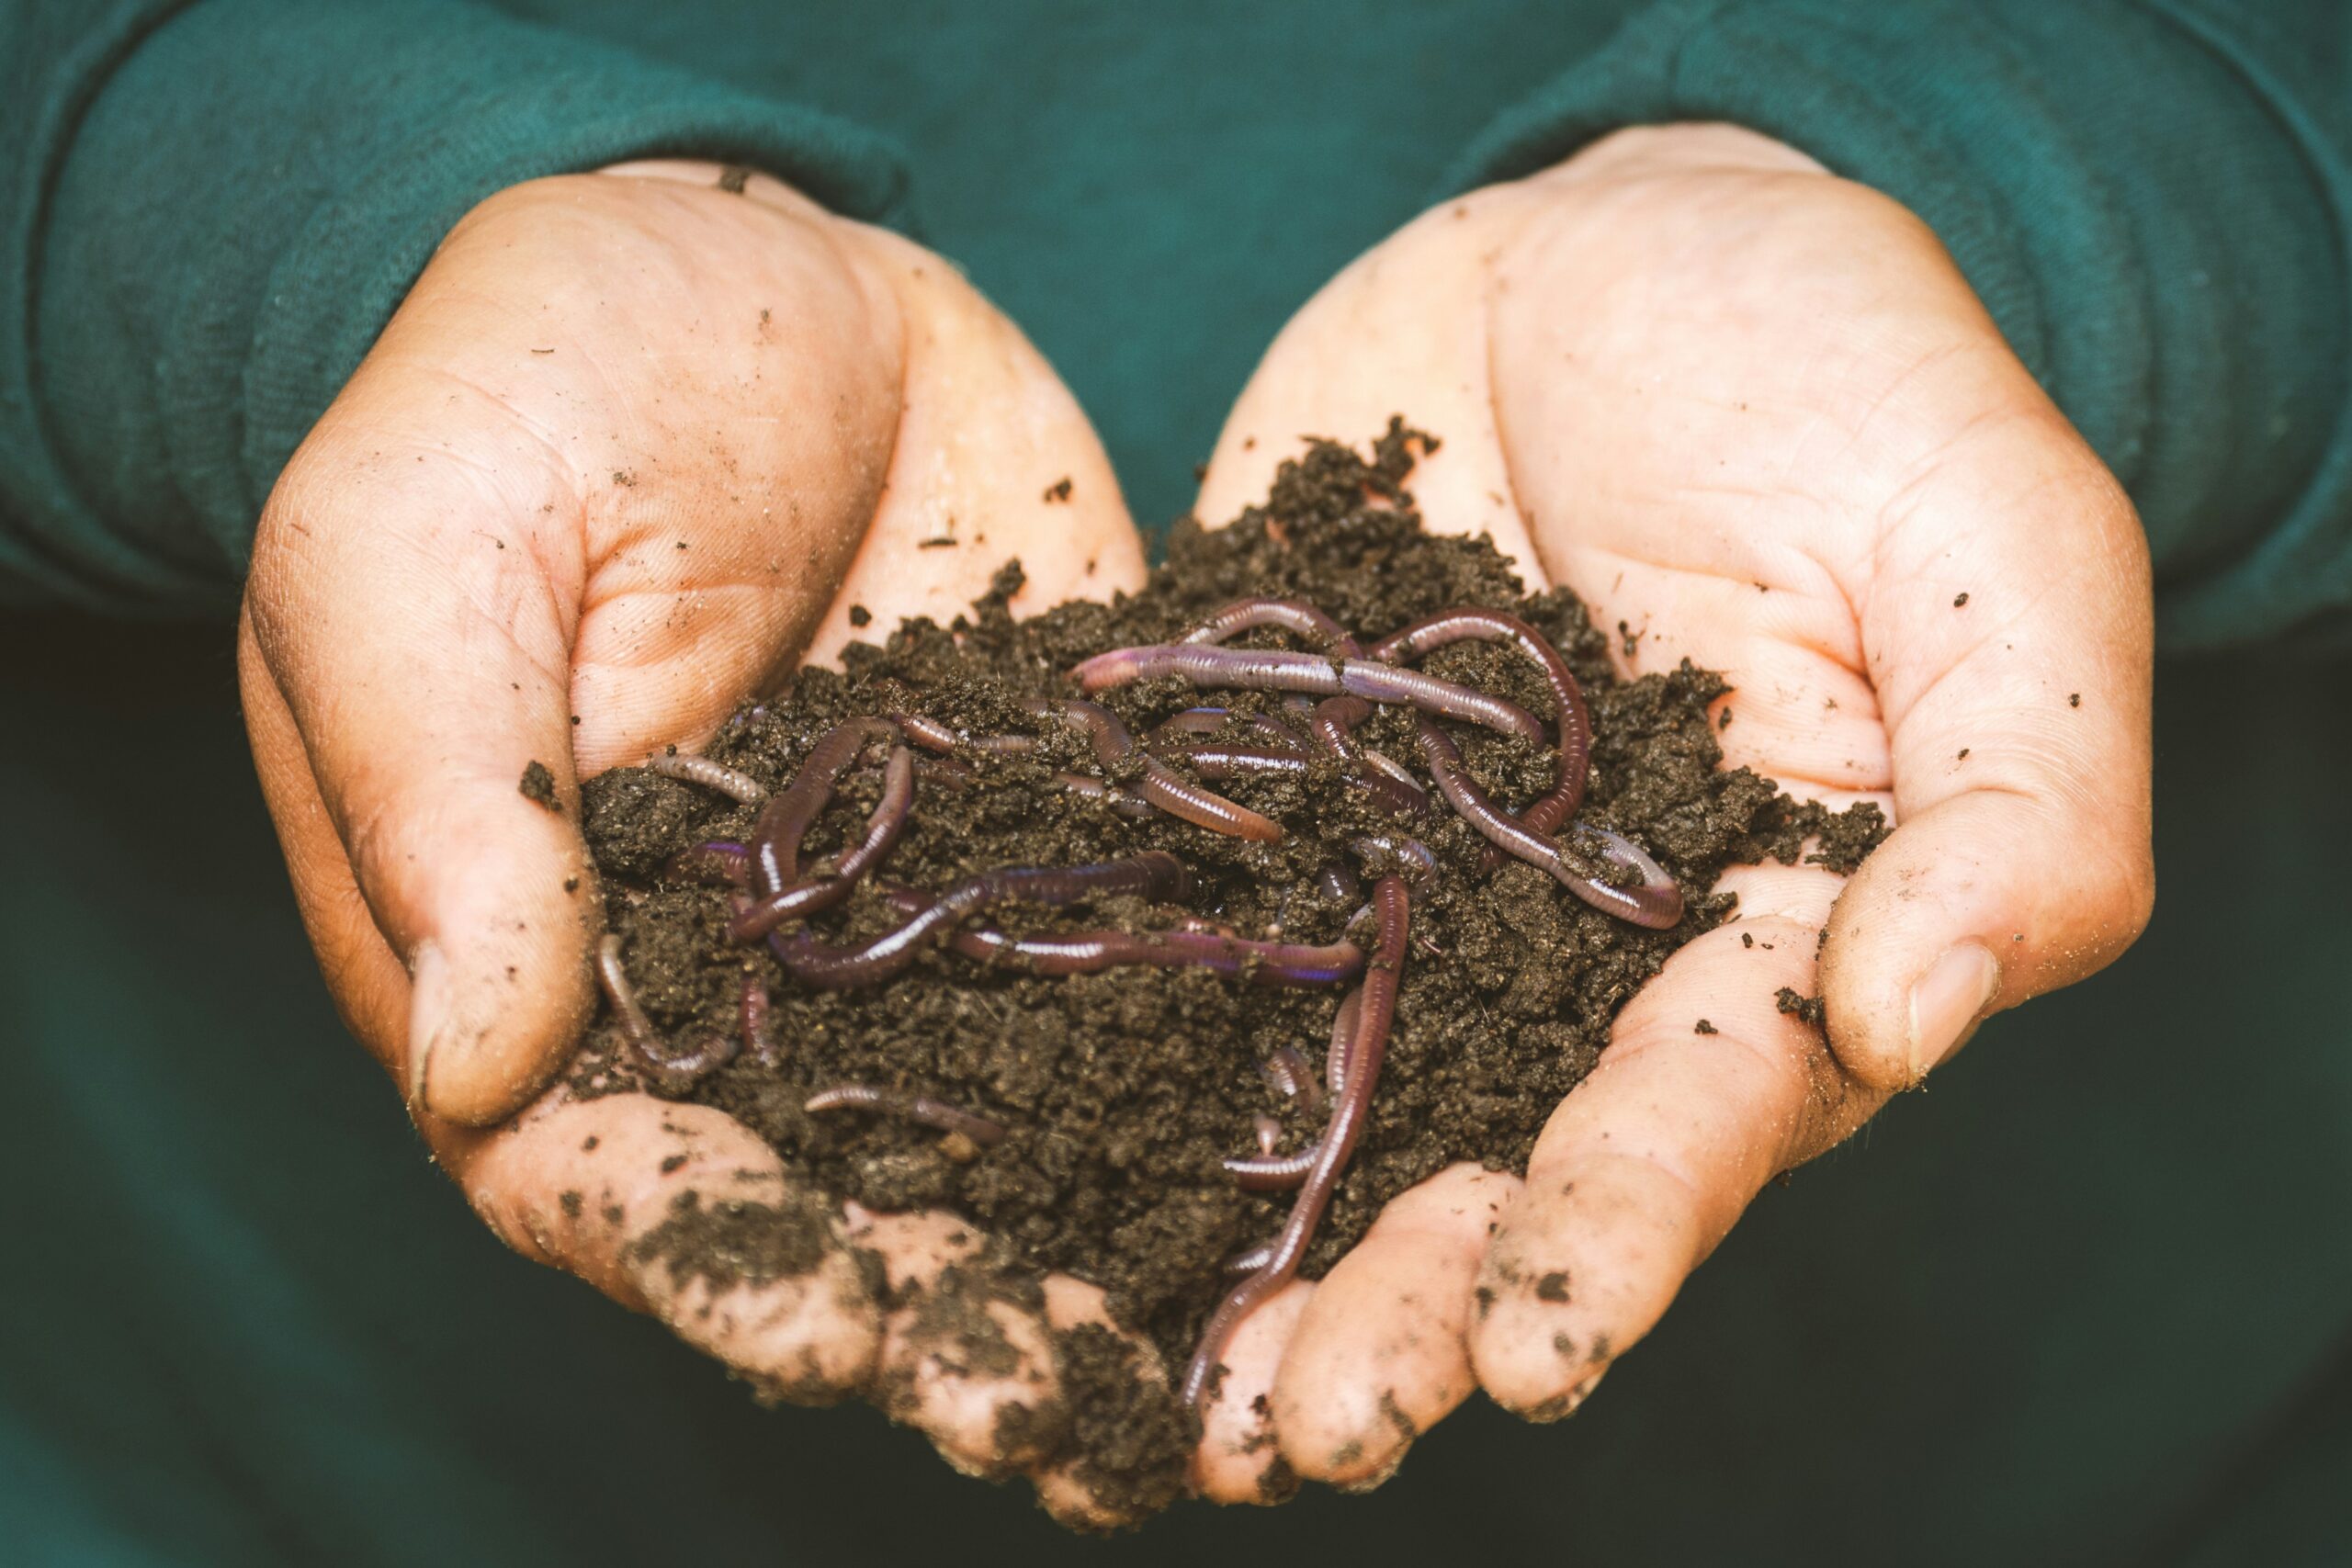 Two hands are holding a pile of dirt filled with worms